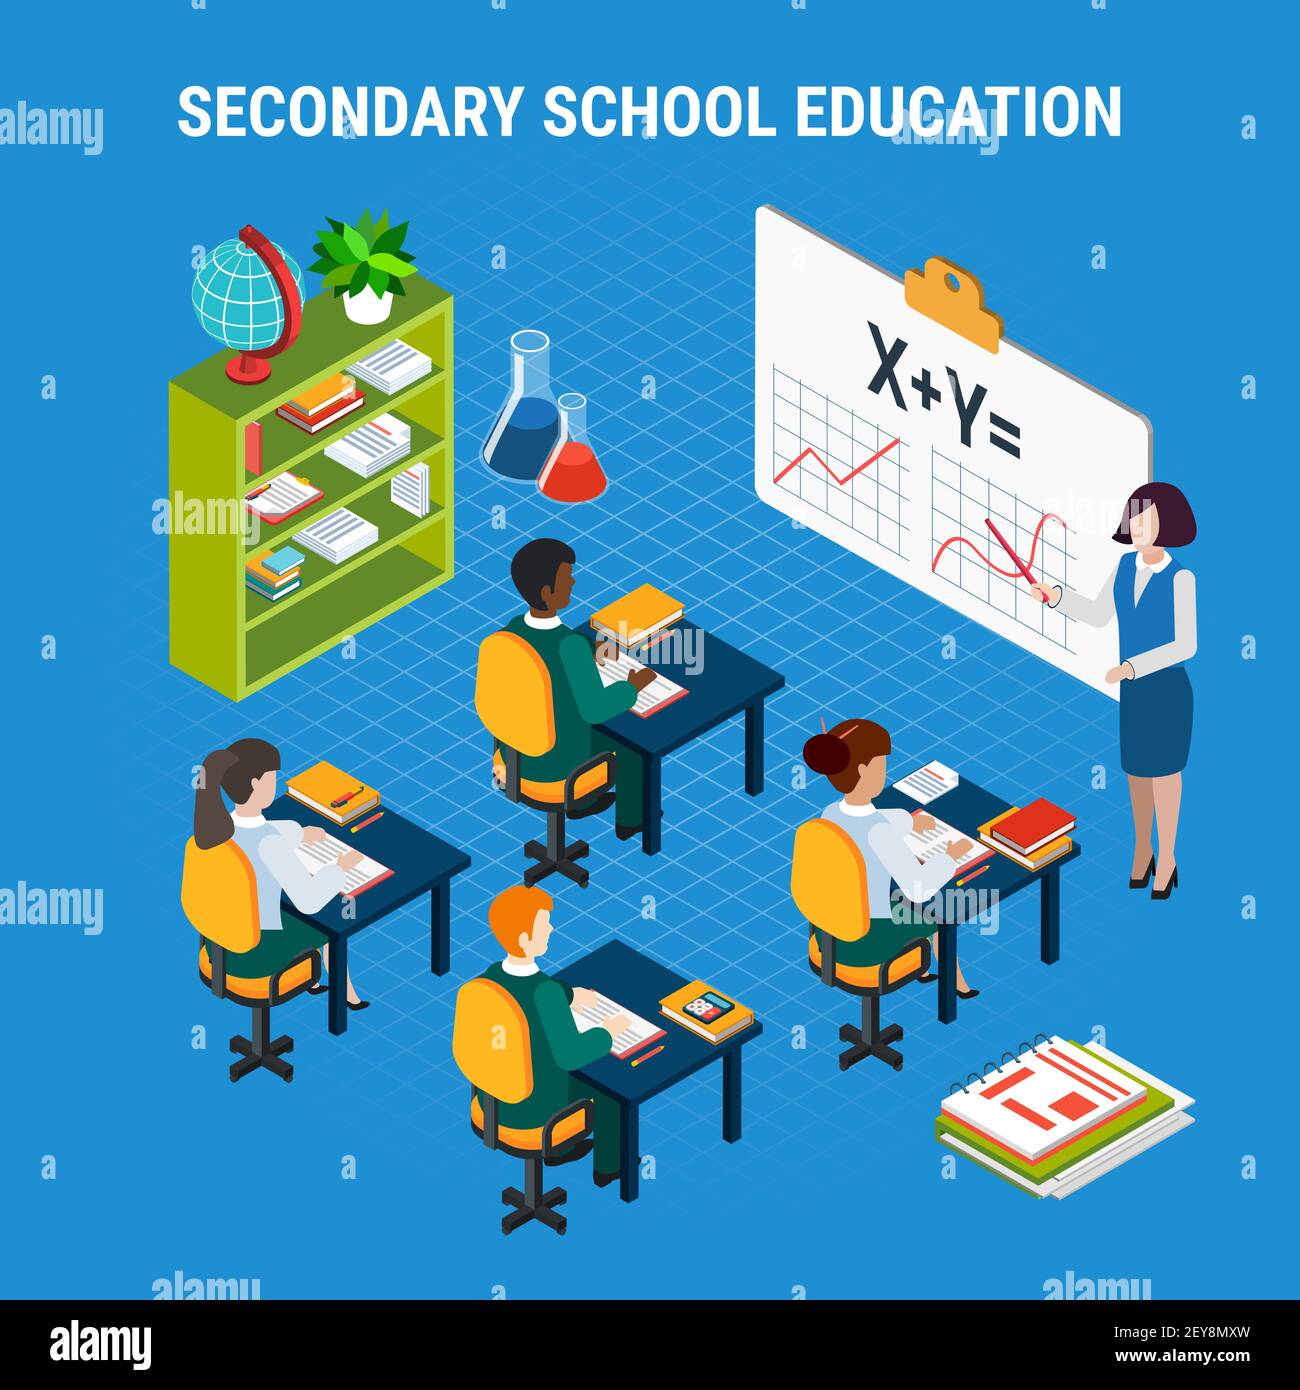 Secondary school students and teacher in classroom education isometric concept 3d vector illustration Stock Vector